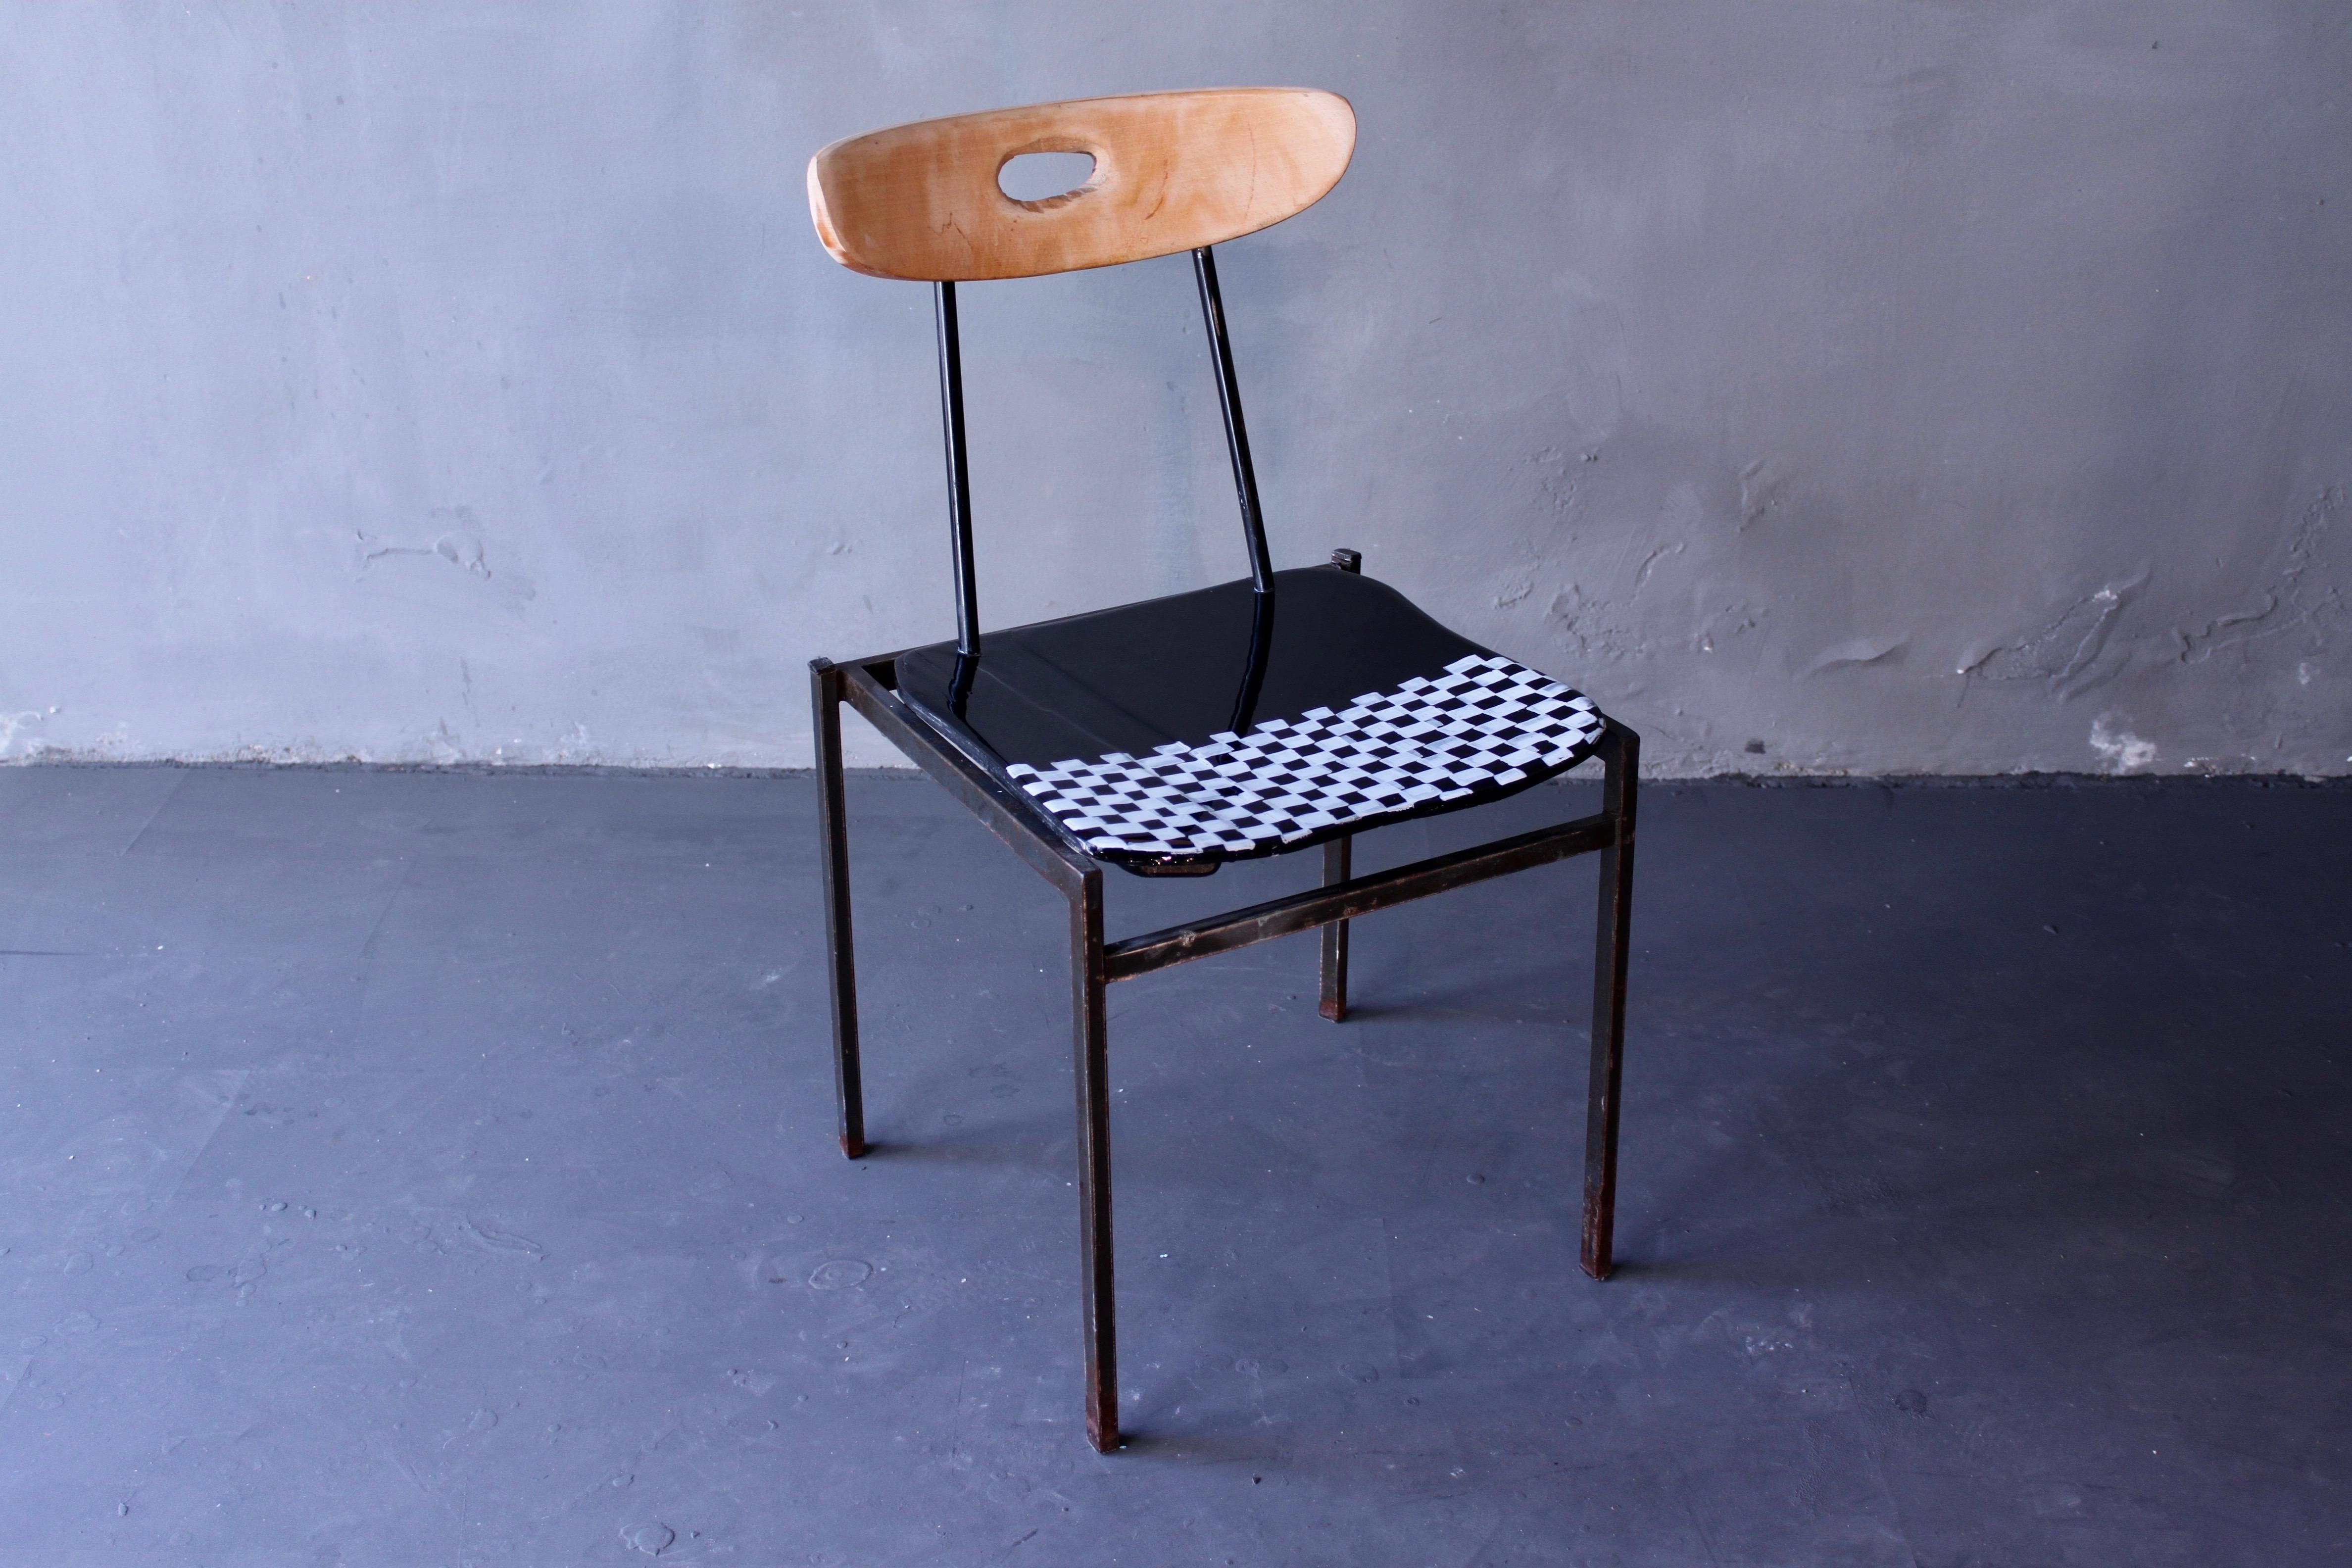 1950s steel frame with seat and backrest added. Painted in black and white, multi-lacquered. In the manner of Marten Baas, Bauhaus, DeCotis, Joaquim Tenreiro, Lúcio Costa, Fernando Campana
I am particularly interested to give value to overlooked,